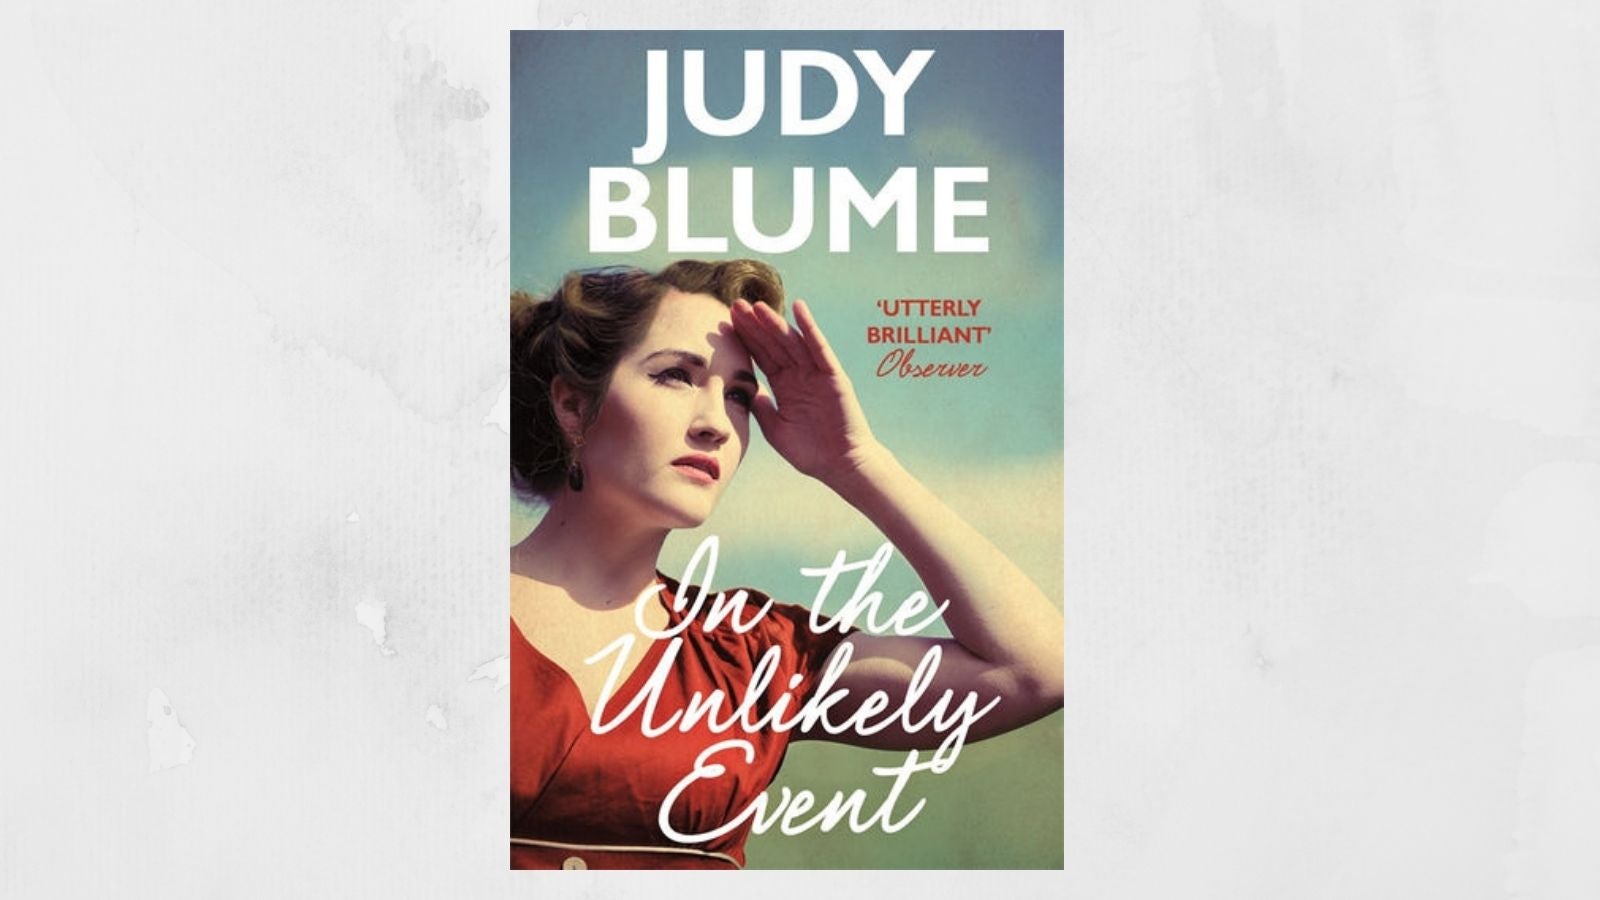 In the Unlikely Event Judy Blume book cover 